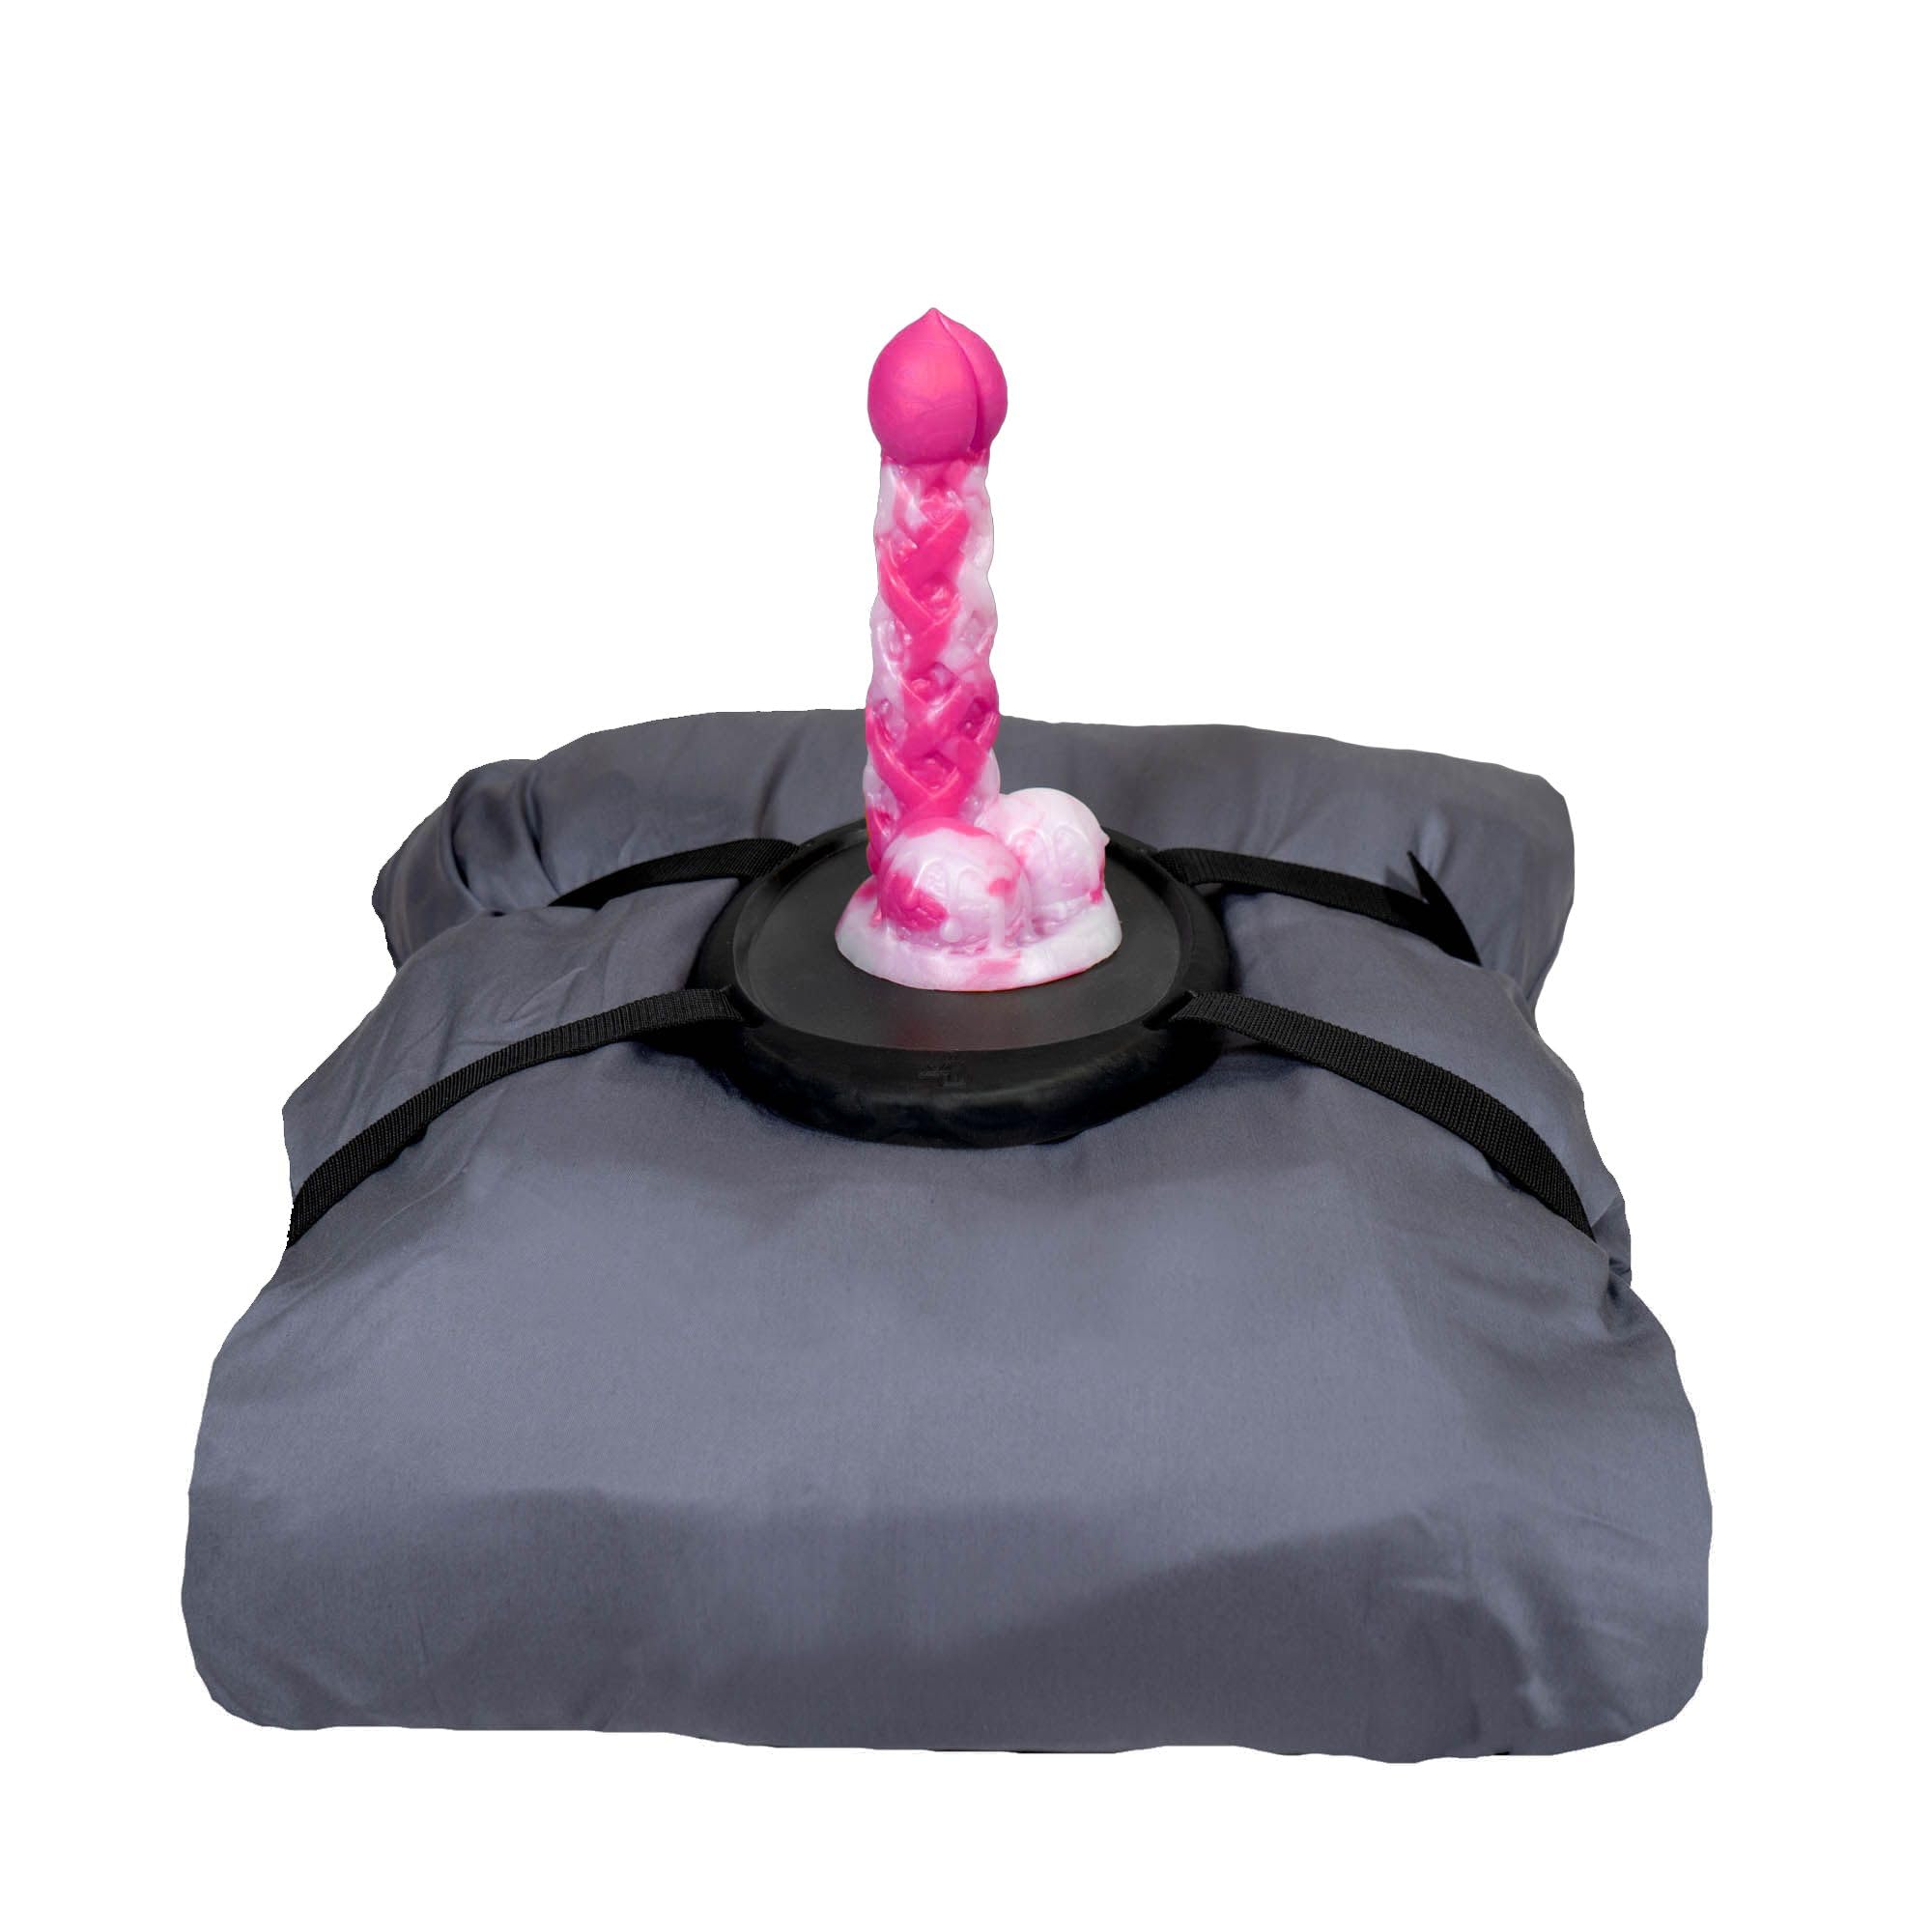 Twisted Fantasies Solo Saddle - Platform Base for Suction Cup Dildo Sex Toys - Strapon to a Pillow or Towel for a Realistic Sex Machine, Sex Swing, Sex Chair